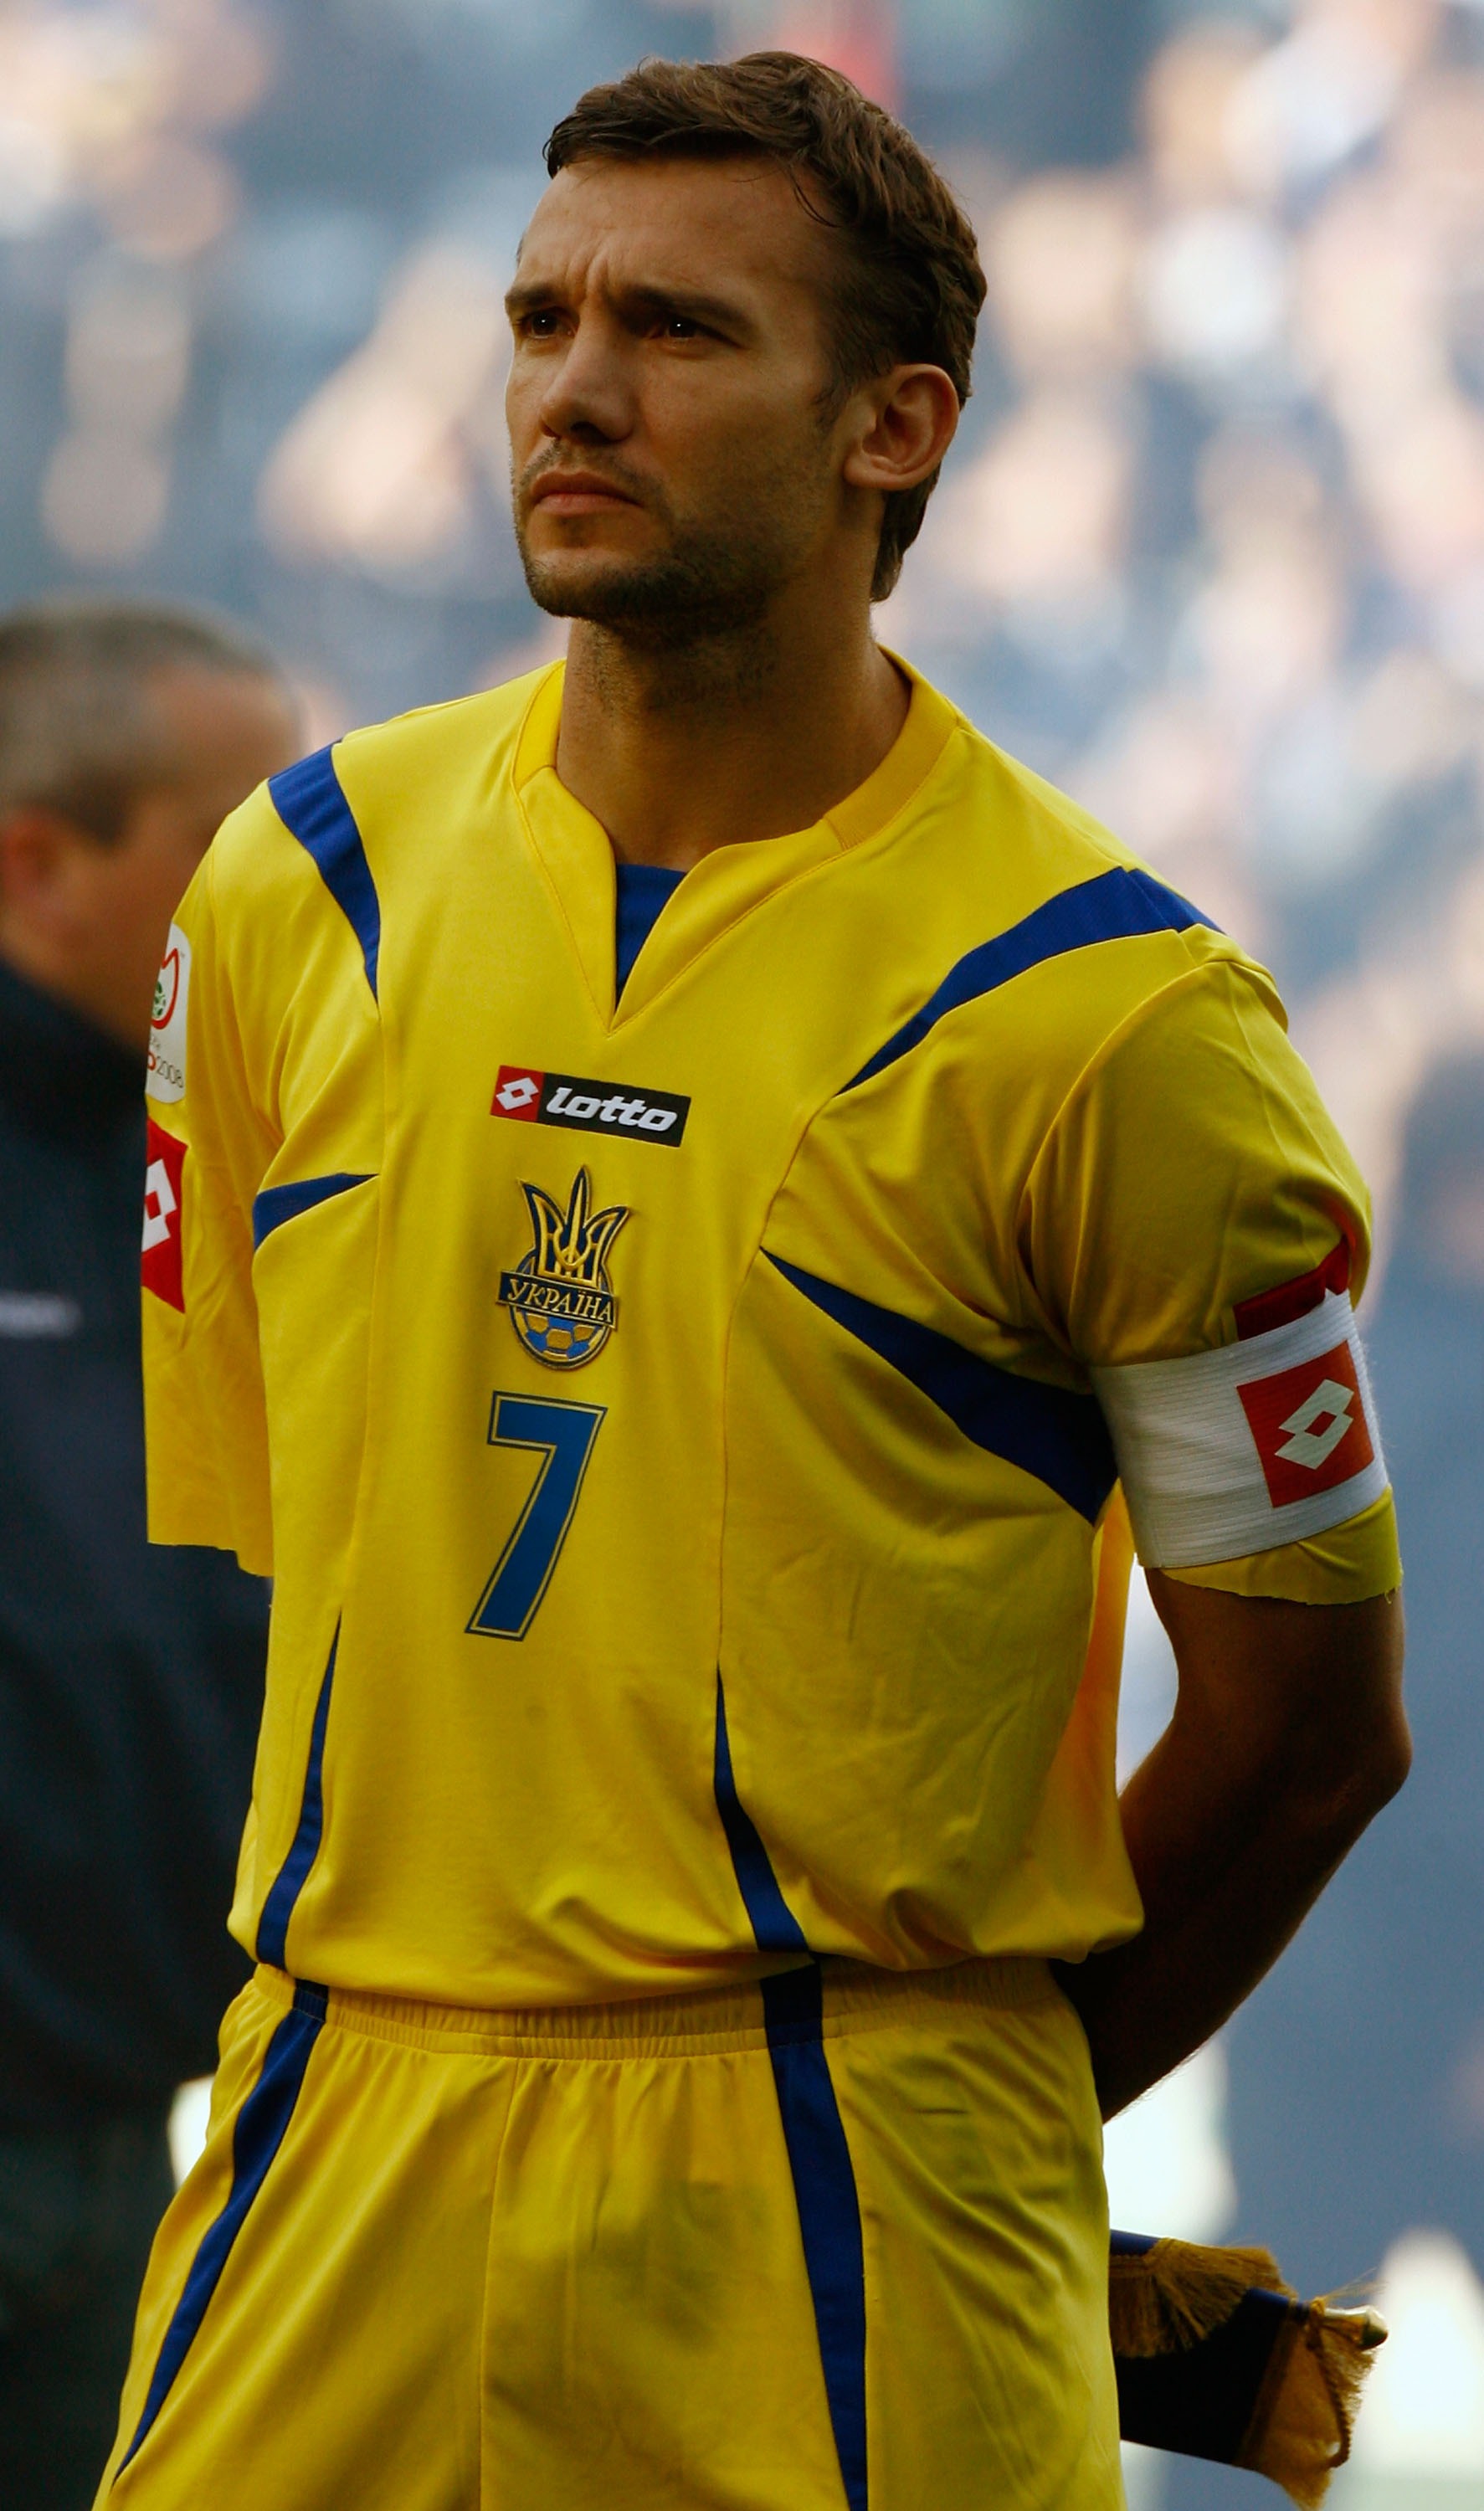 GLASGOW, UNITED KINGDOM - OCTOBER 13: Andriy Shevchenko of the Ukraine before the Euro 2008 Group B qualifying match between Scotland and Ukraine at Hampden Park on October 13, 2007 in Glasgow, Scotland  (Photo by Jeff J Mitchell/Getty Images)